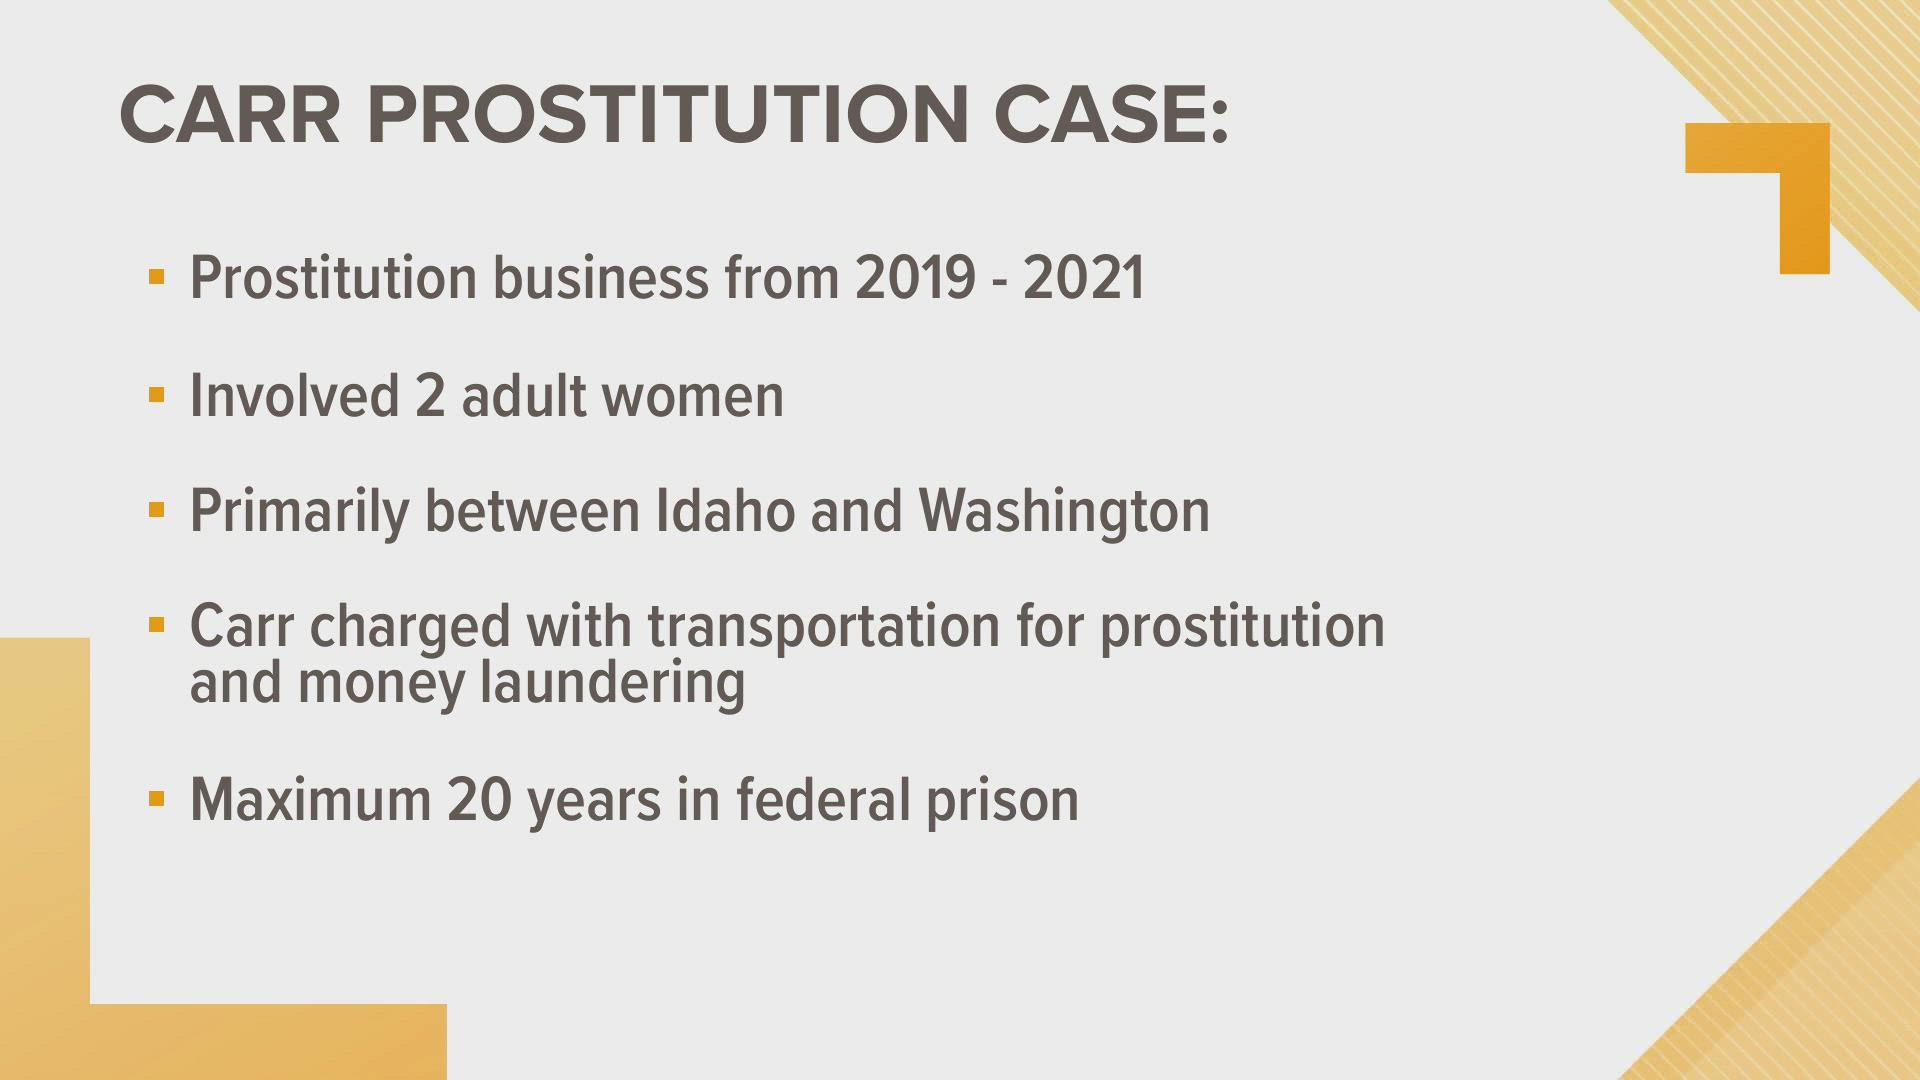 The Boise man managed an operation involved in the prostitution of two adult females across state lines, primarily between Idaho and Washington.